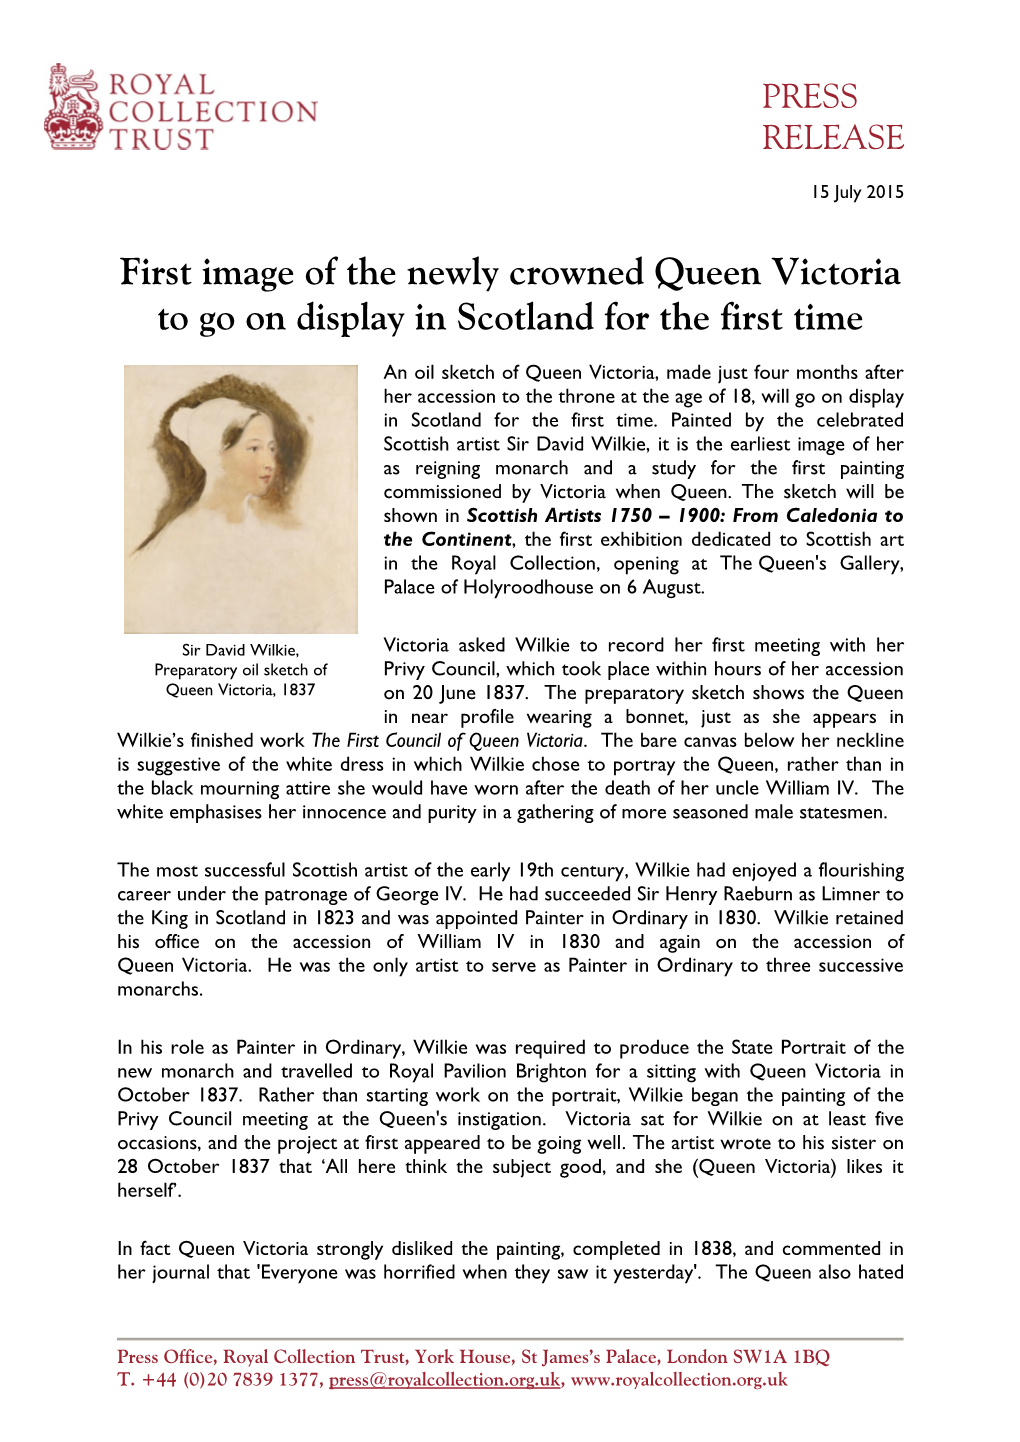 First Image of the Newly Crowned Queen Victoria to Go on Display in Scotland for the First Time